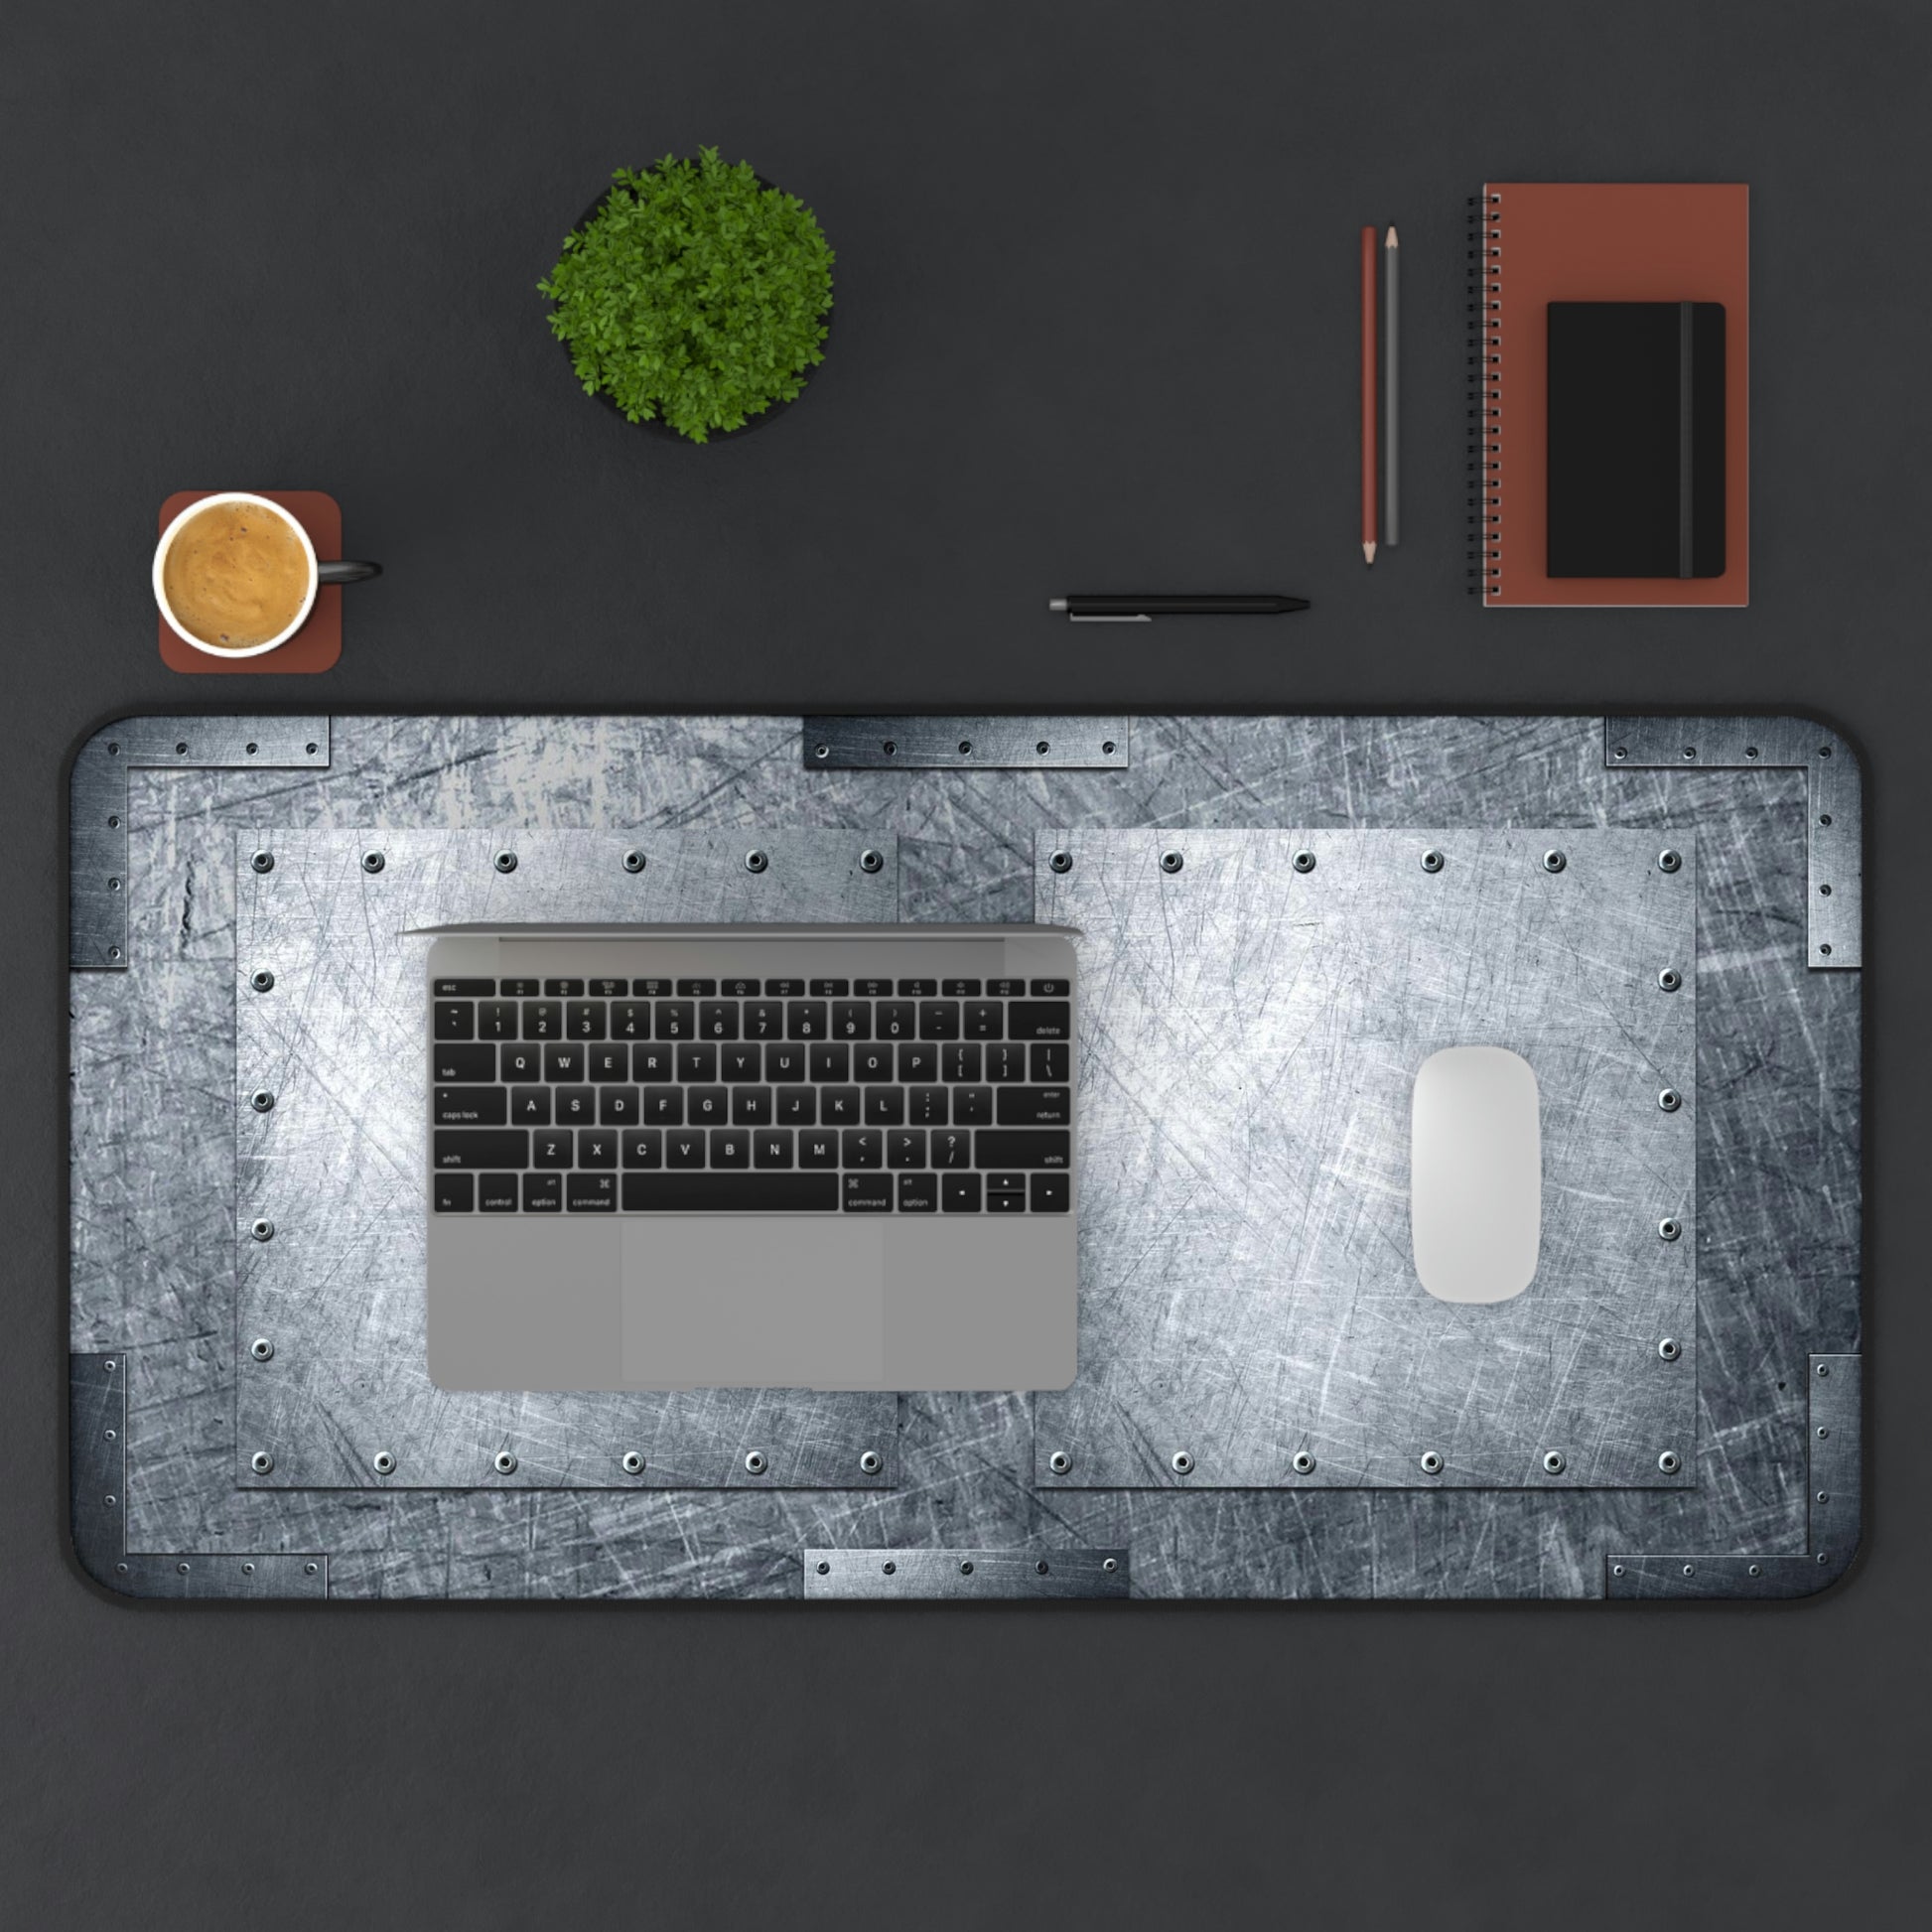 Industrial Themed Desk Accessories - Riveted Steel Sheets Print on Neoprene Desk Mat 15.5 by 31 on desk  with laptop